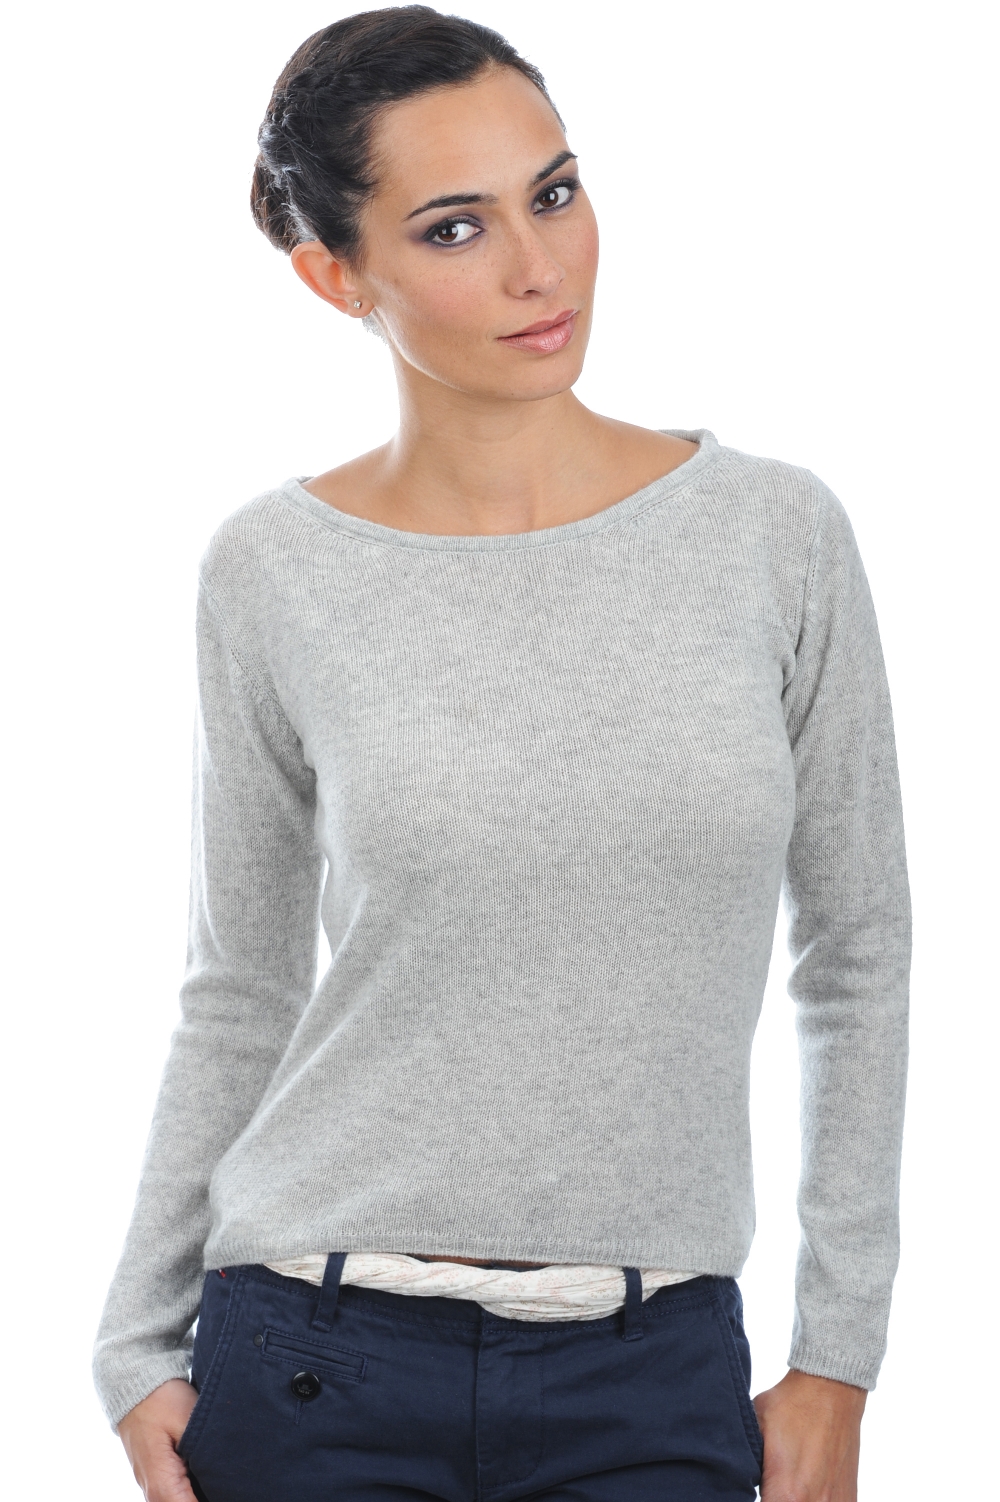 Cashmere ladies basic sweaters at low prices caleen flanelle chine 2xl